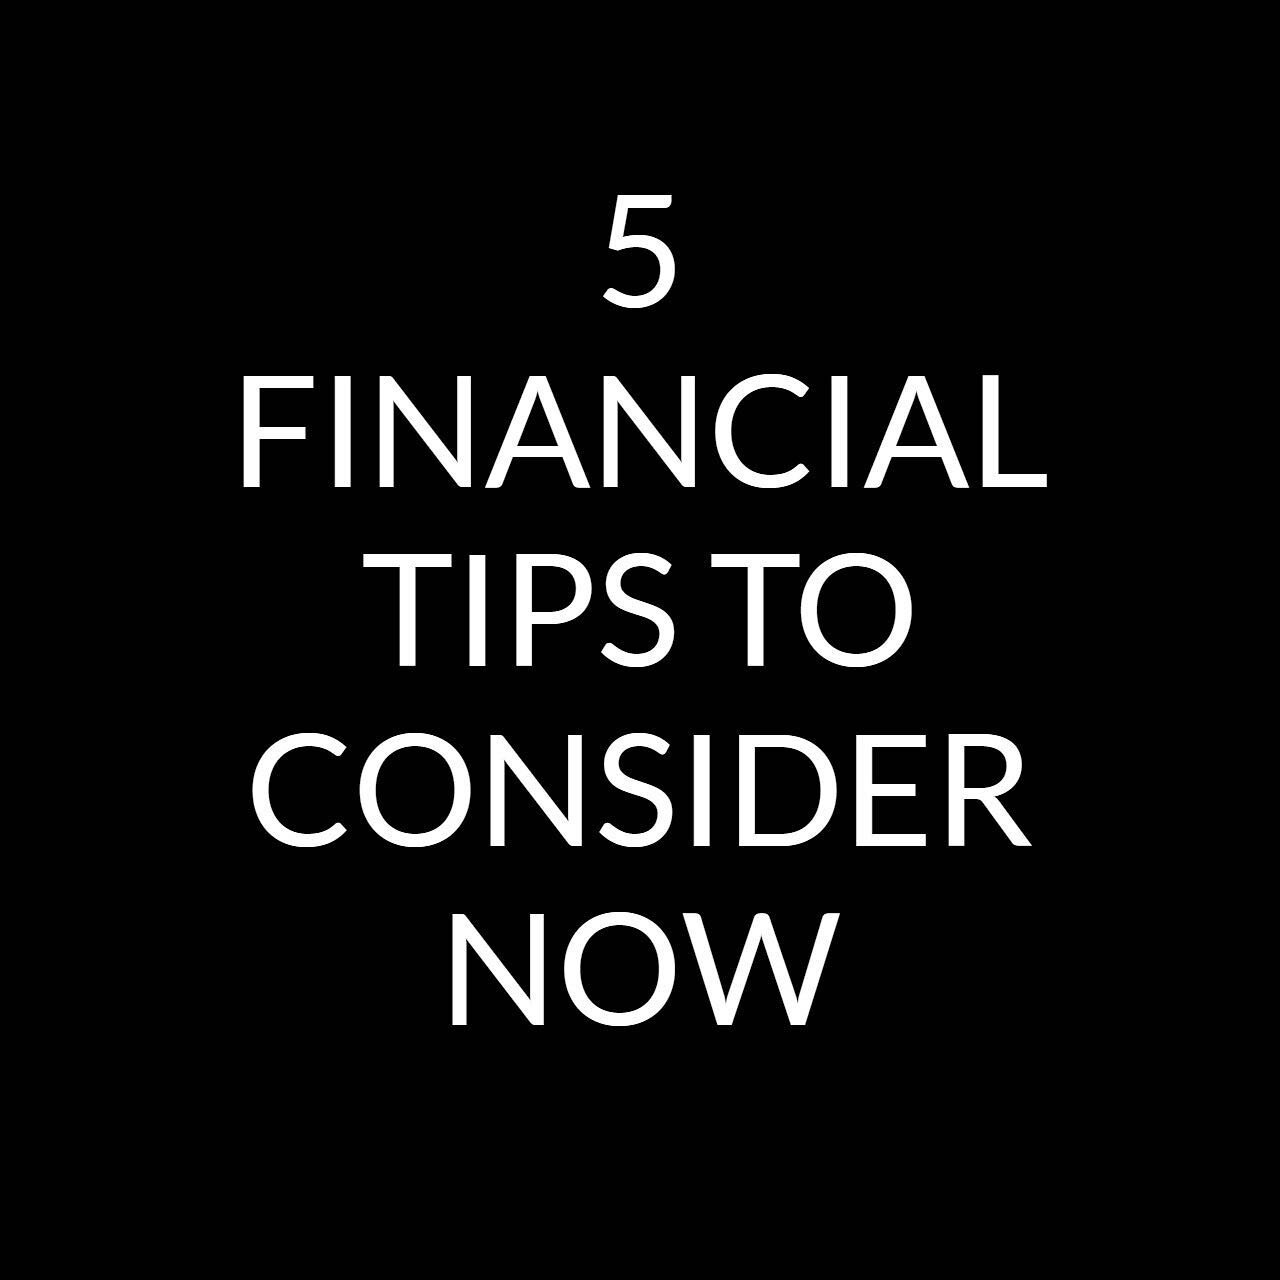 5 Financial Tips to Consider Now:

1.  Don&rsquo;t be a victim to scams: Scammers are using coronavirus to exploit people who are desperate. Be aware of fake charities, fake banks, &amp; fake IRS agents asking for personal info or money. ⠀ ⠀⠀⠀⠀⠀⠀⠀⠀⠀⠀